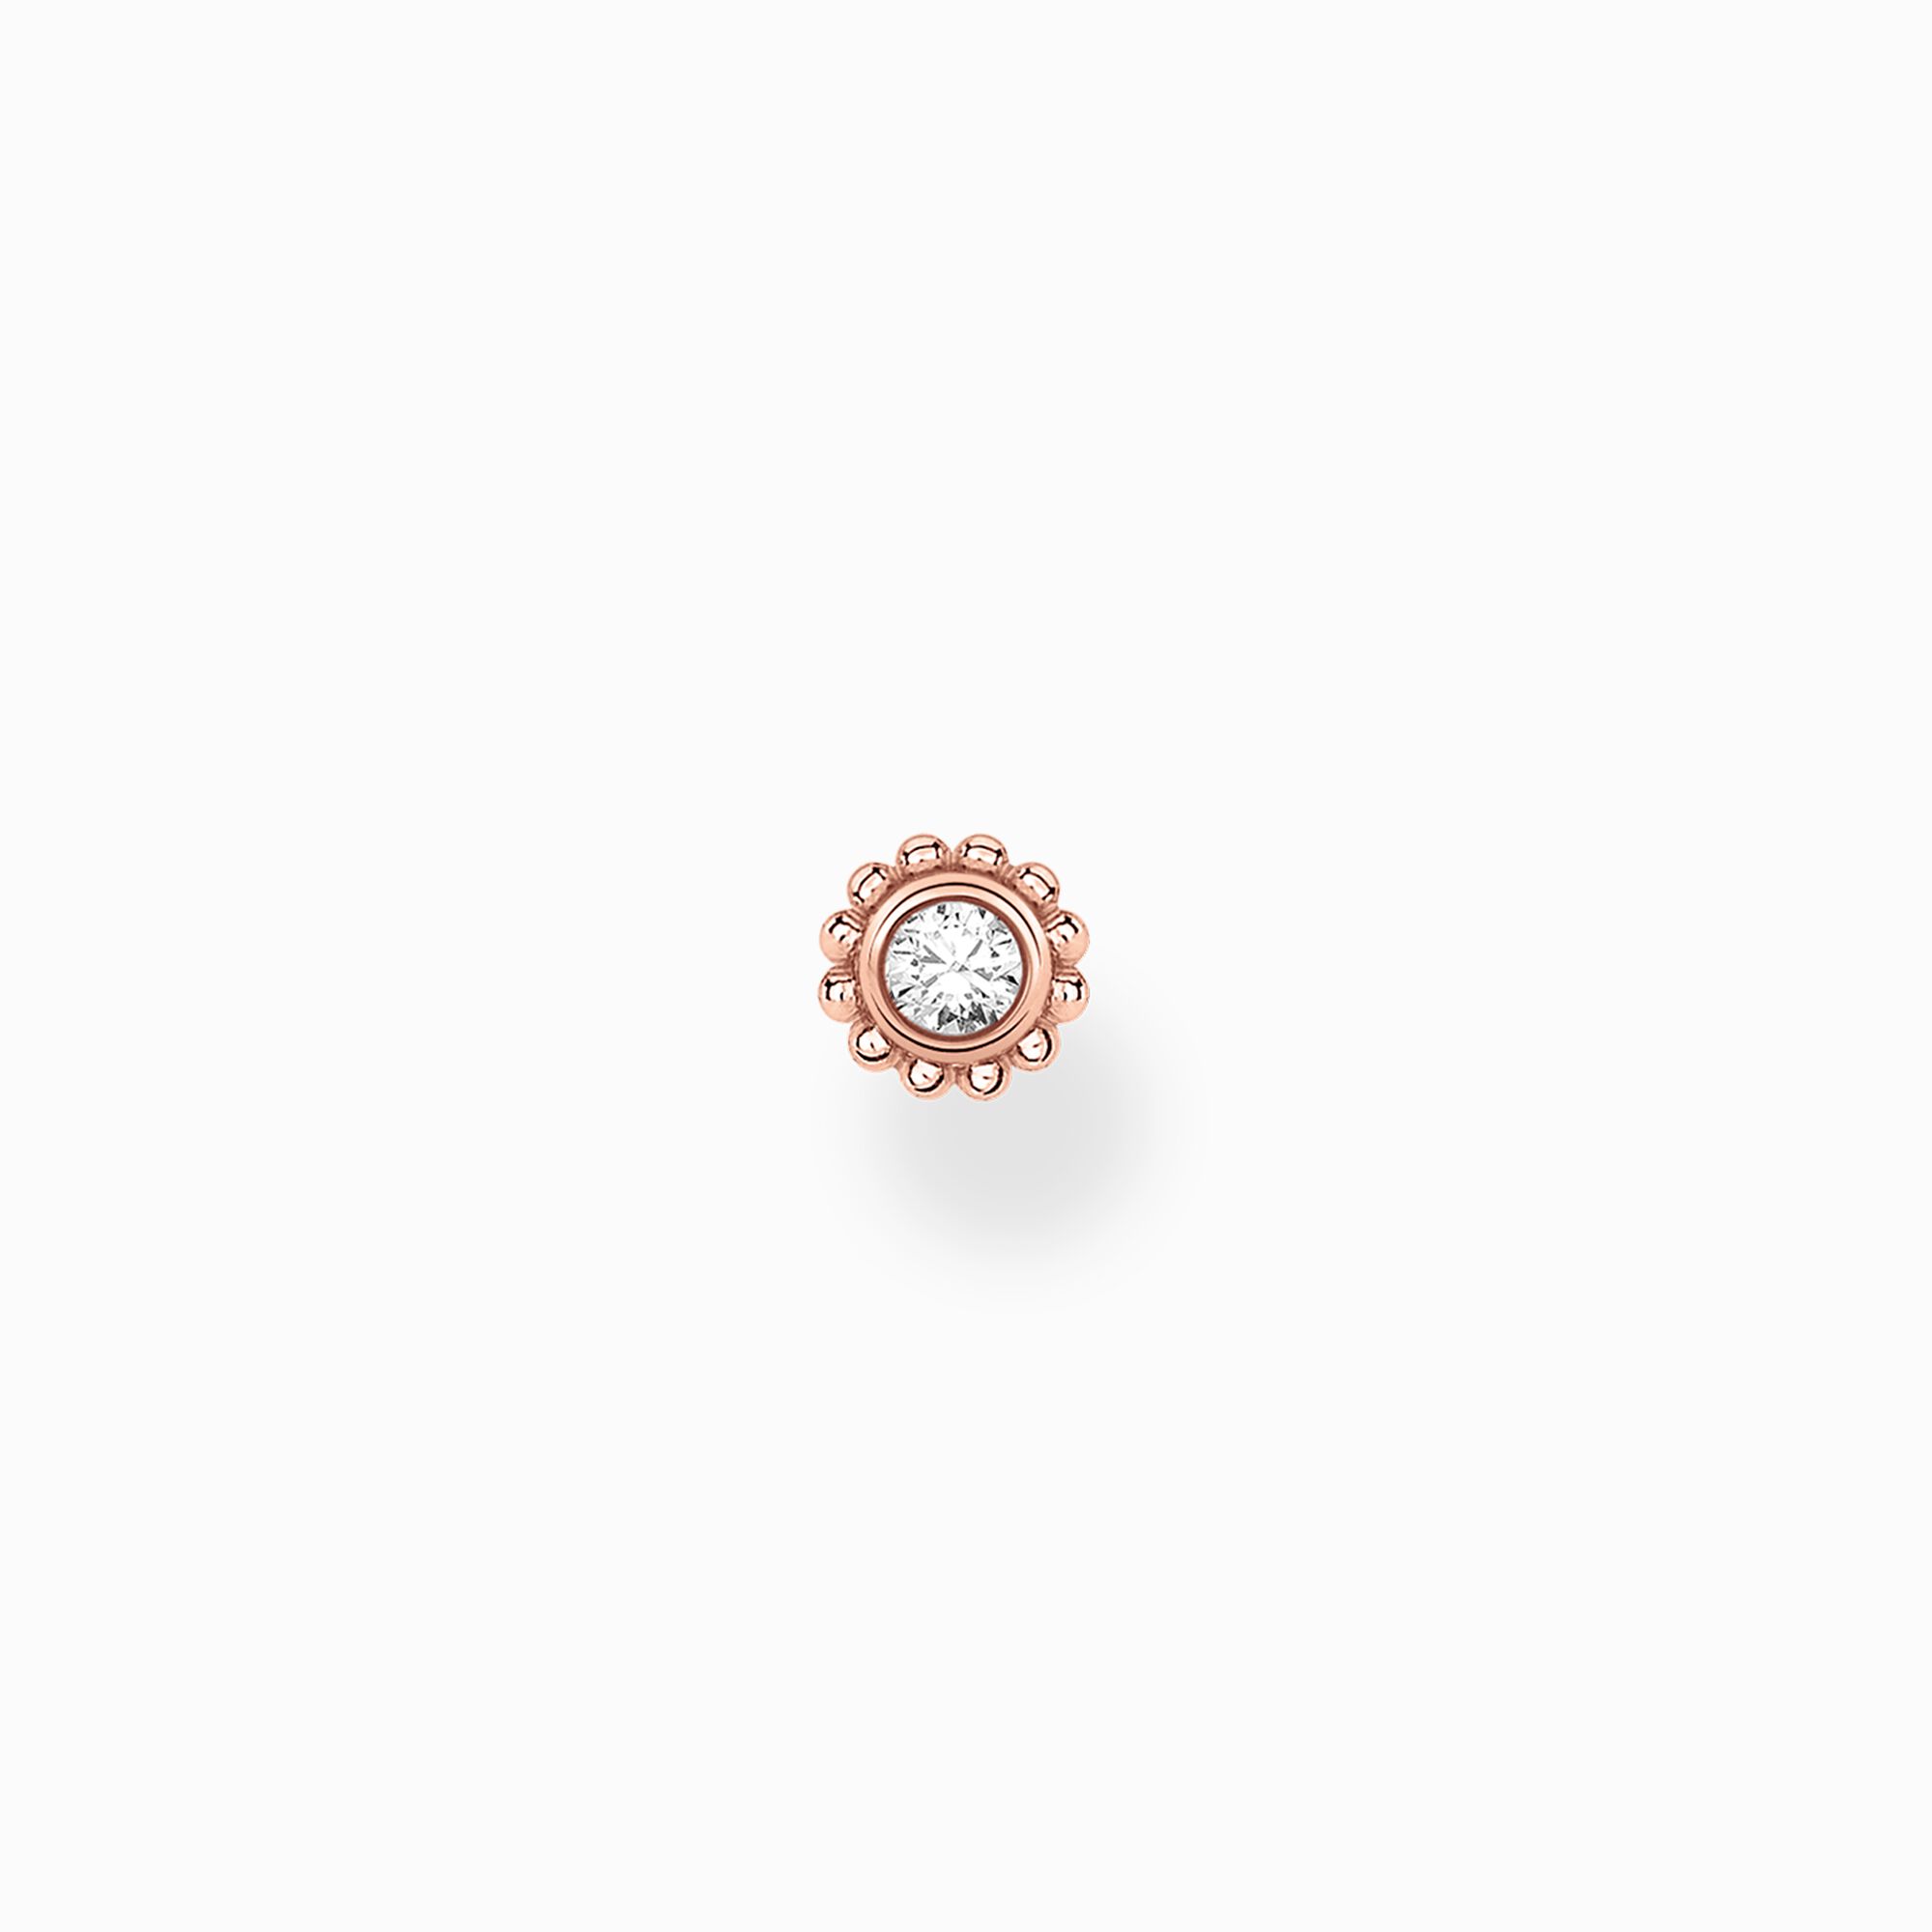 Single ear stud flower white stone rose gold from the Charming Collection collection in the THOMAS SABO online store